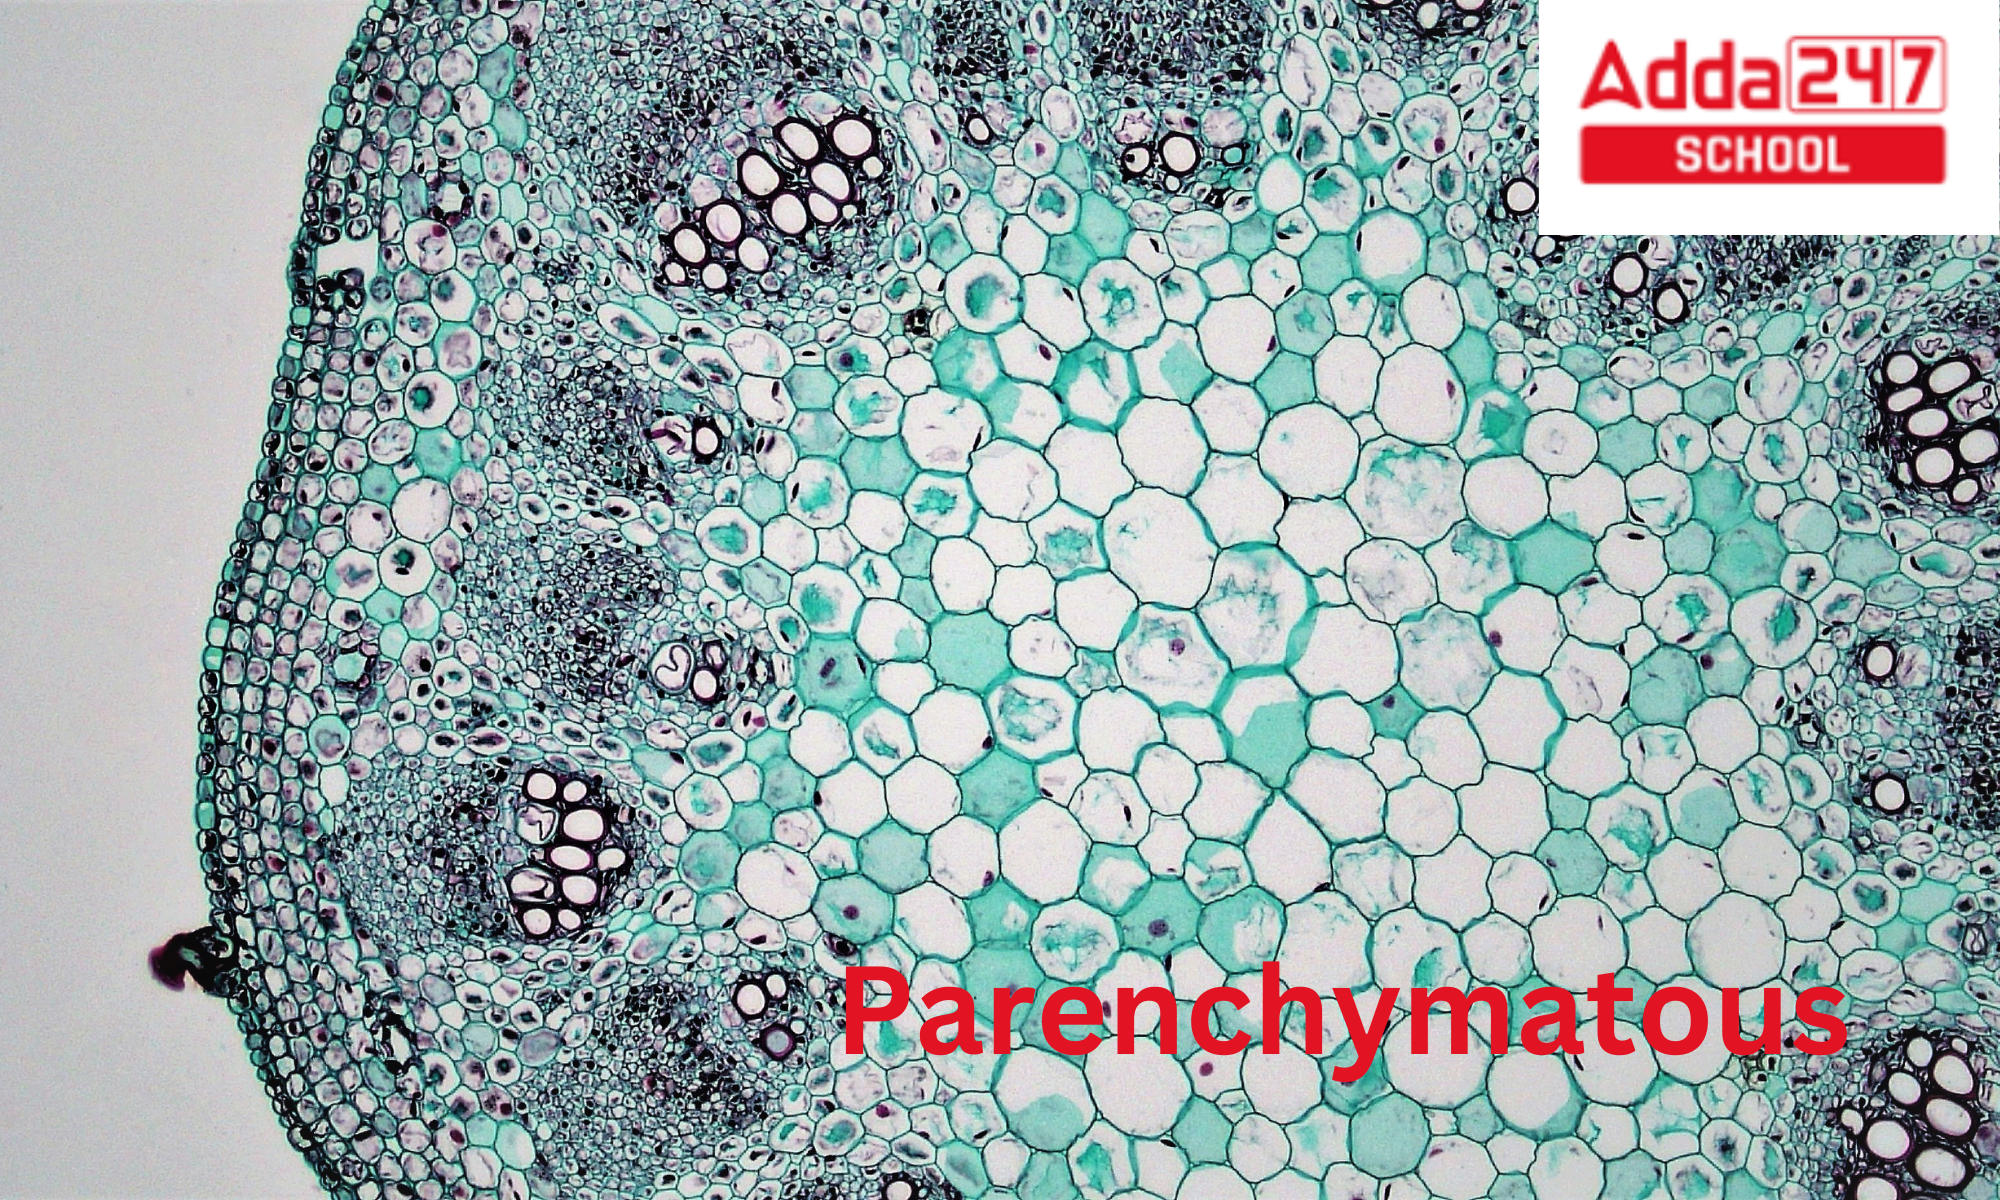 Parenchyma Cells, Tissue, Meaning, Function, and Diagram_20.1